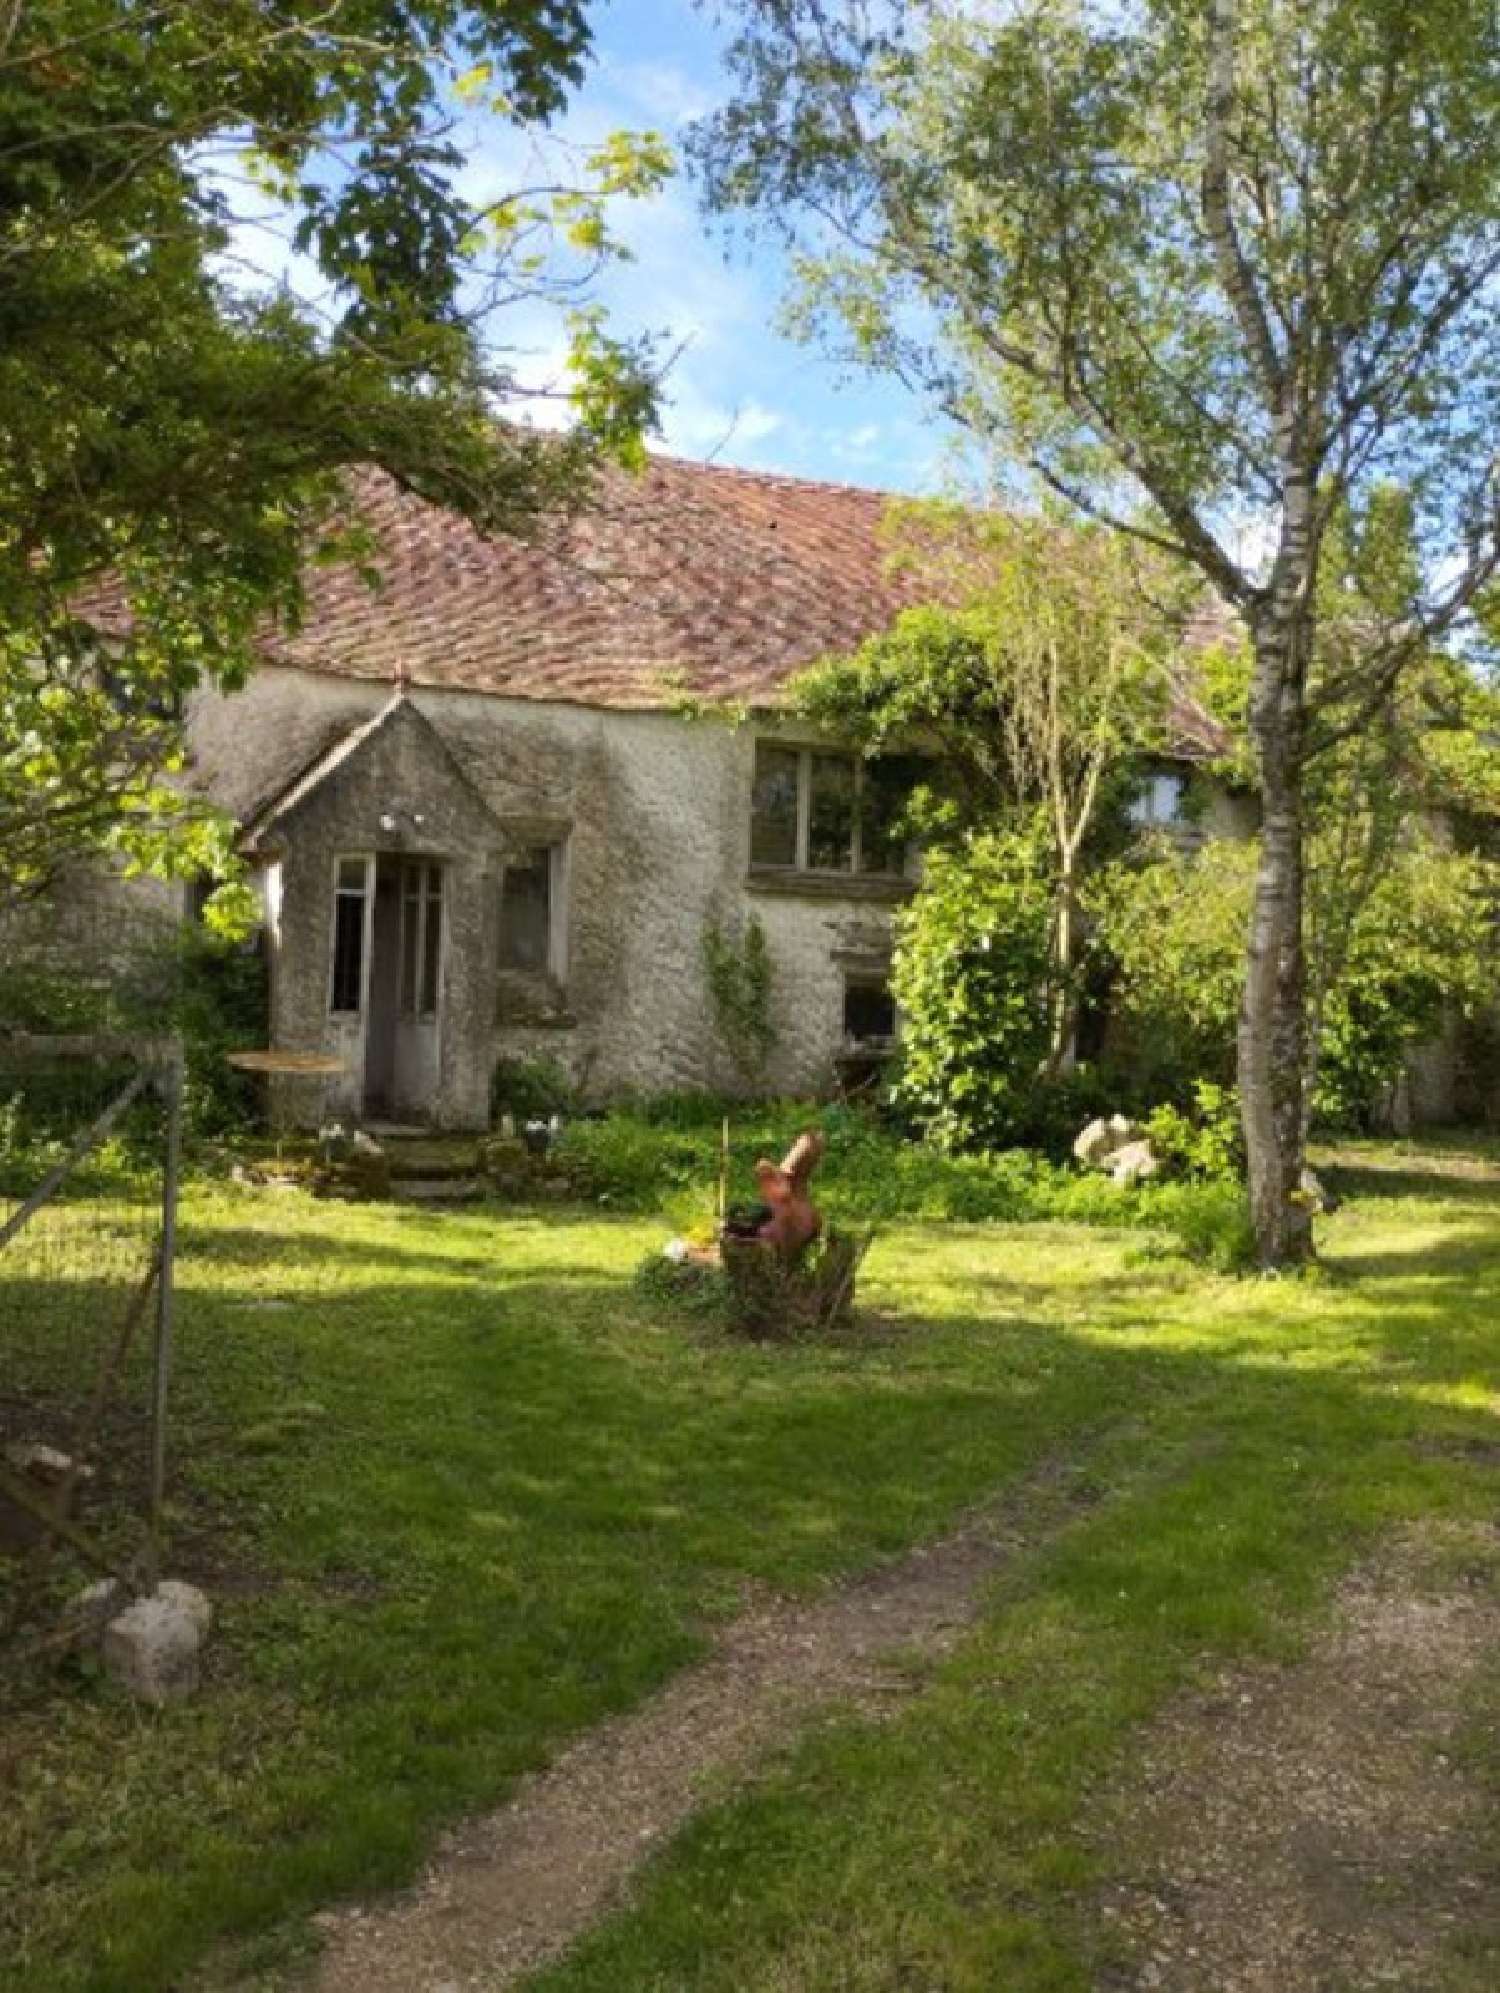  for sale estate Coulommiers Seine-et-Marne 6